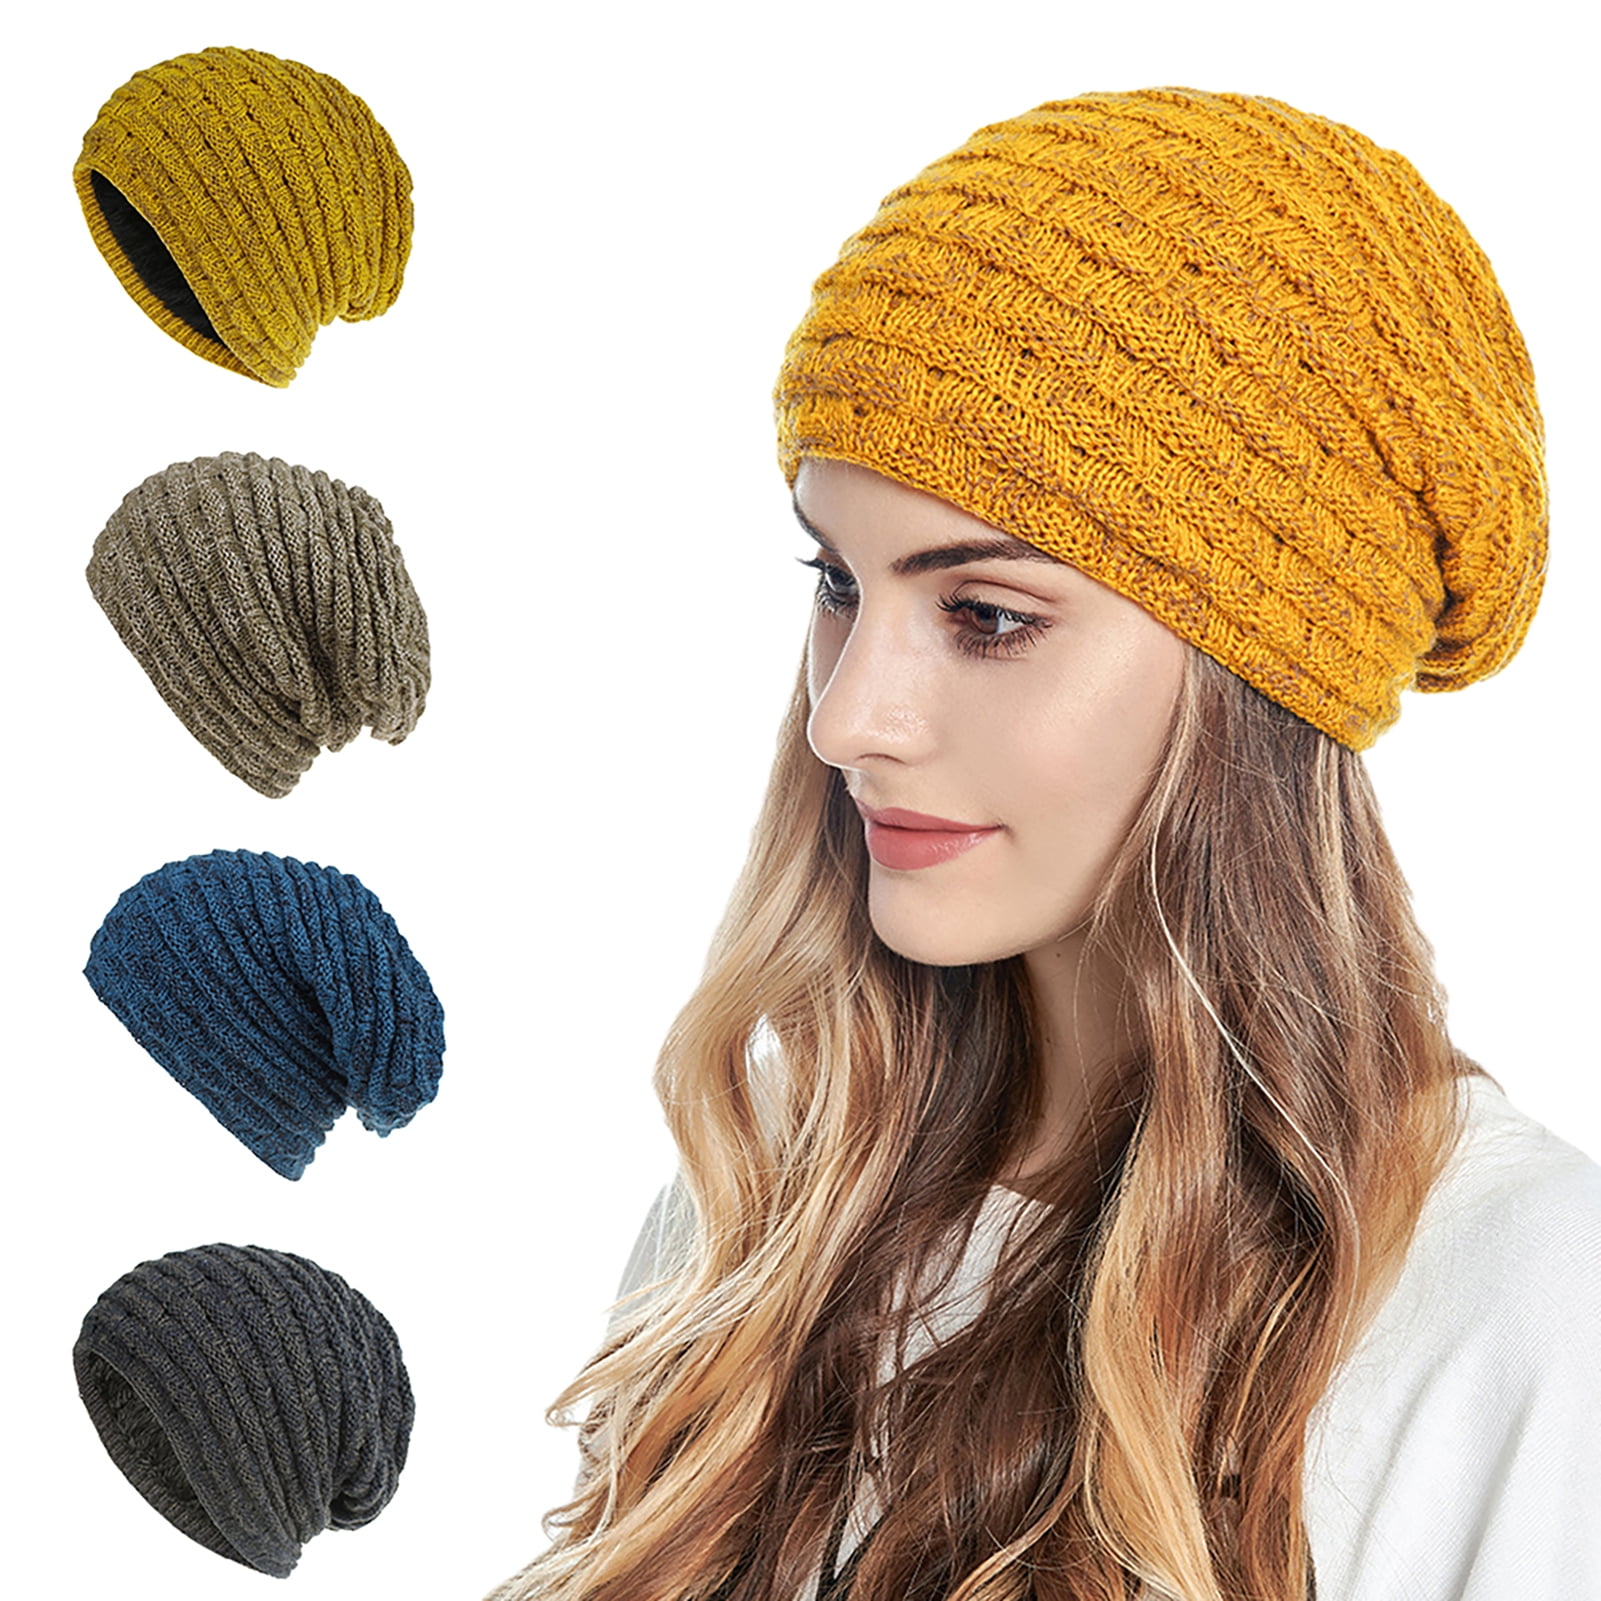 COZY CLASSIC HAT Knit winter hat Mustard knit hat wool knitted hat knit beanie chunky knit slouch beanie Classic slouchy knit hat